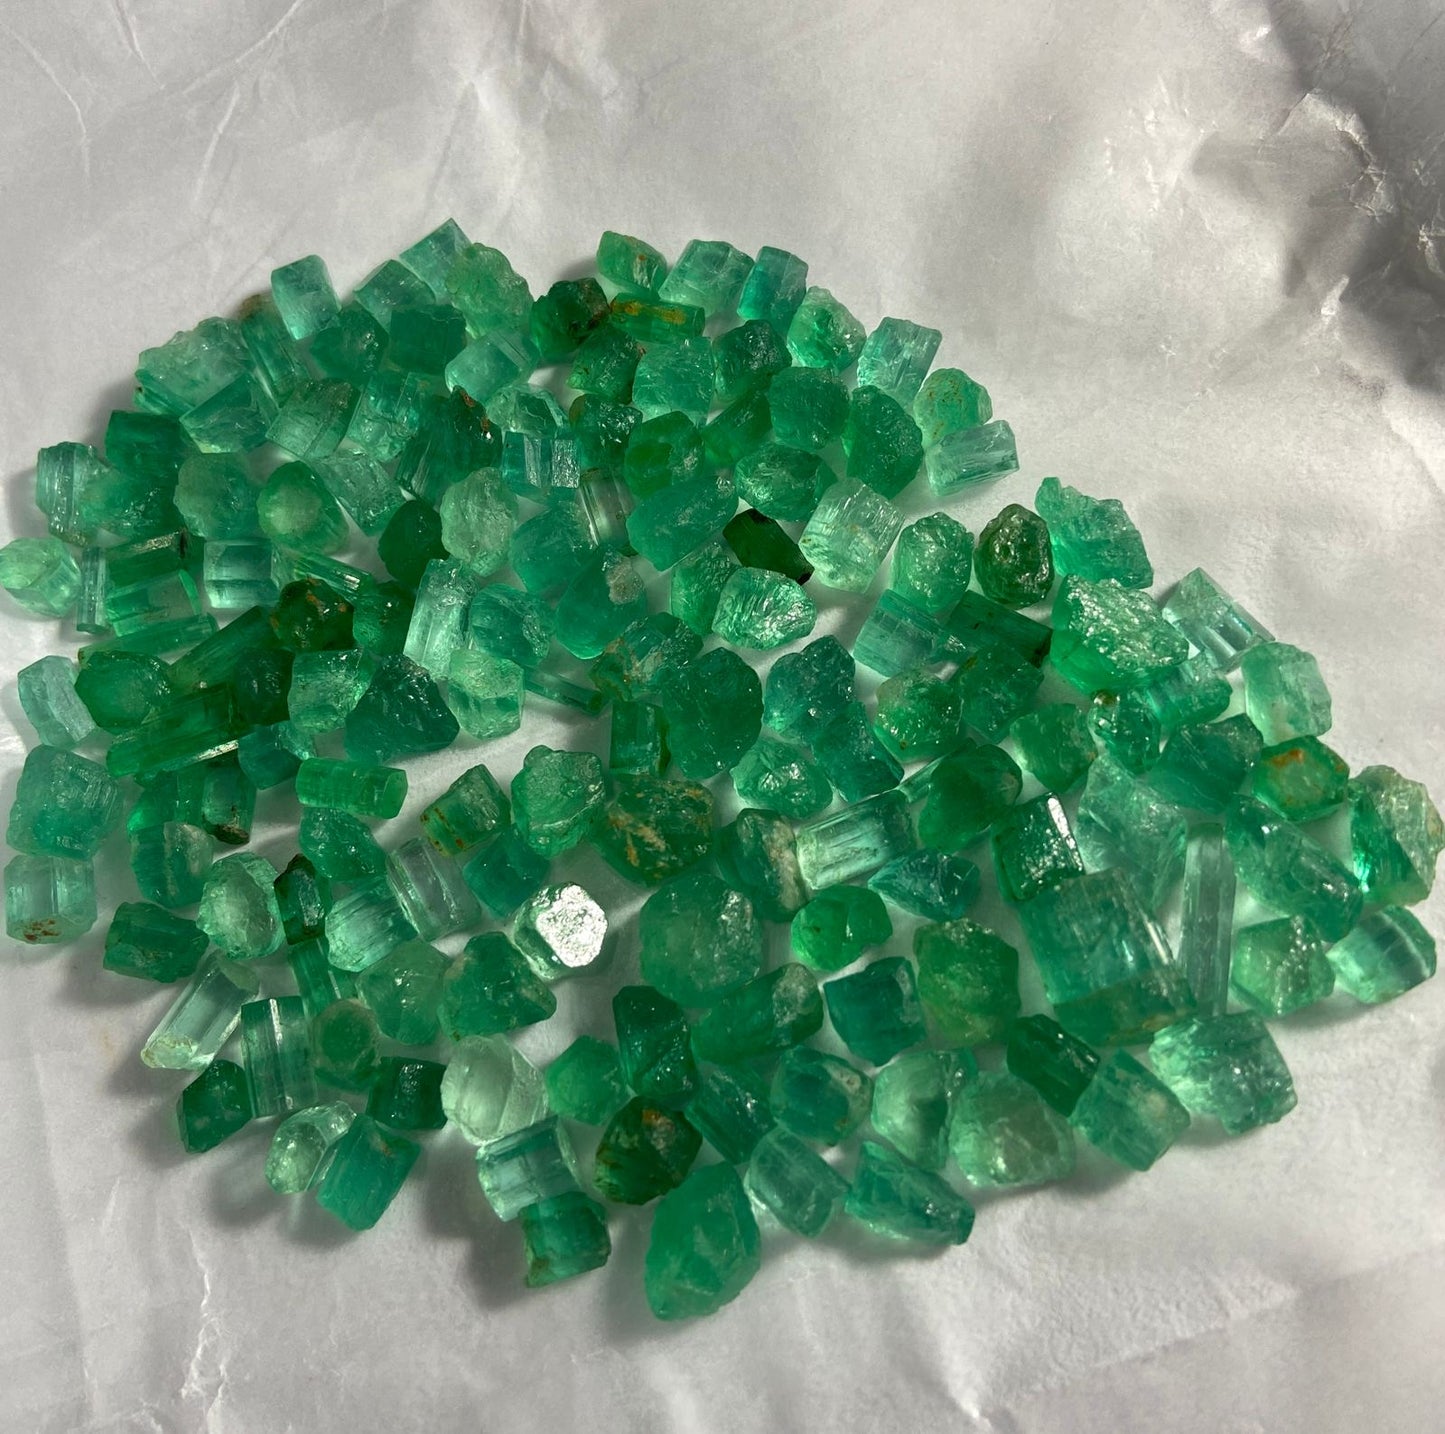 200 carats Natural Raw Emerald Green Stones for faceting